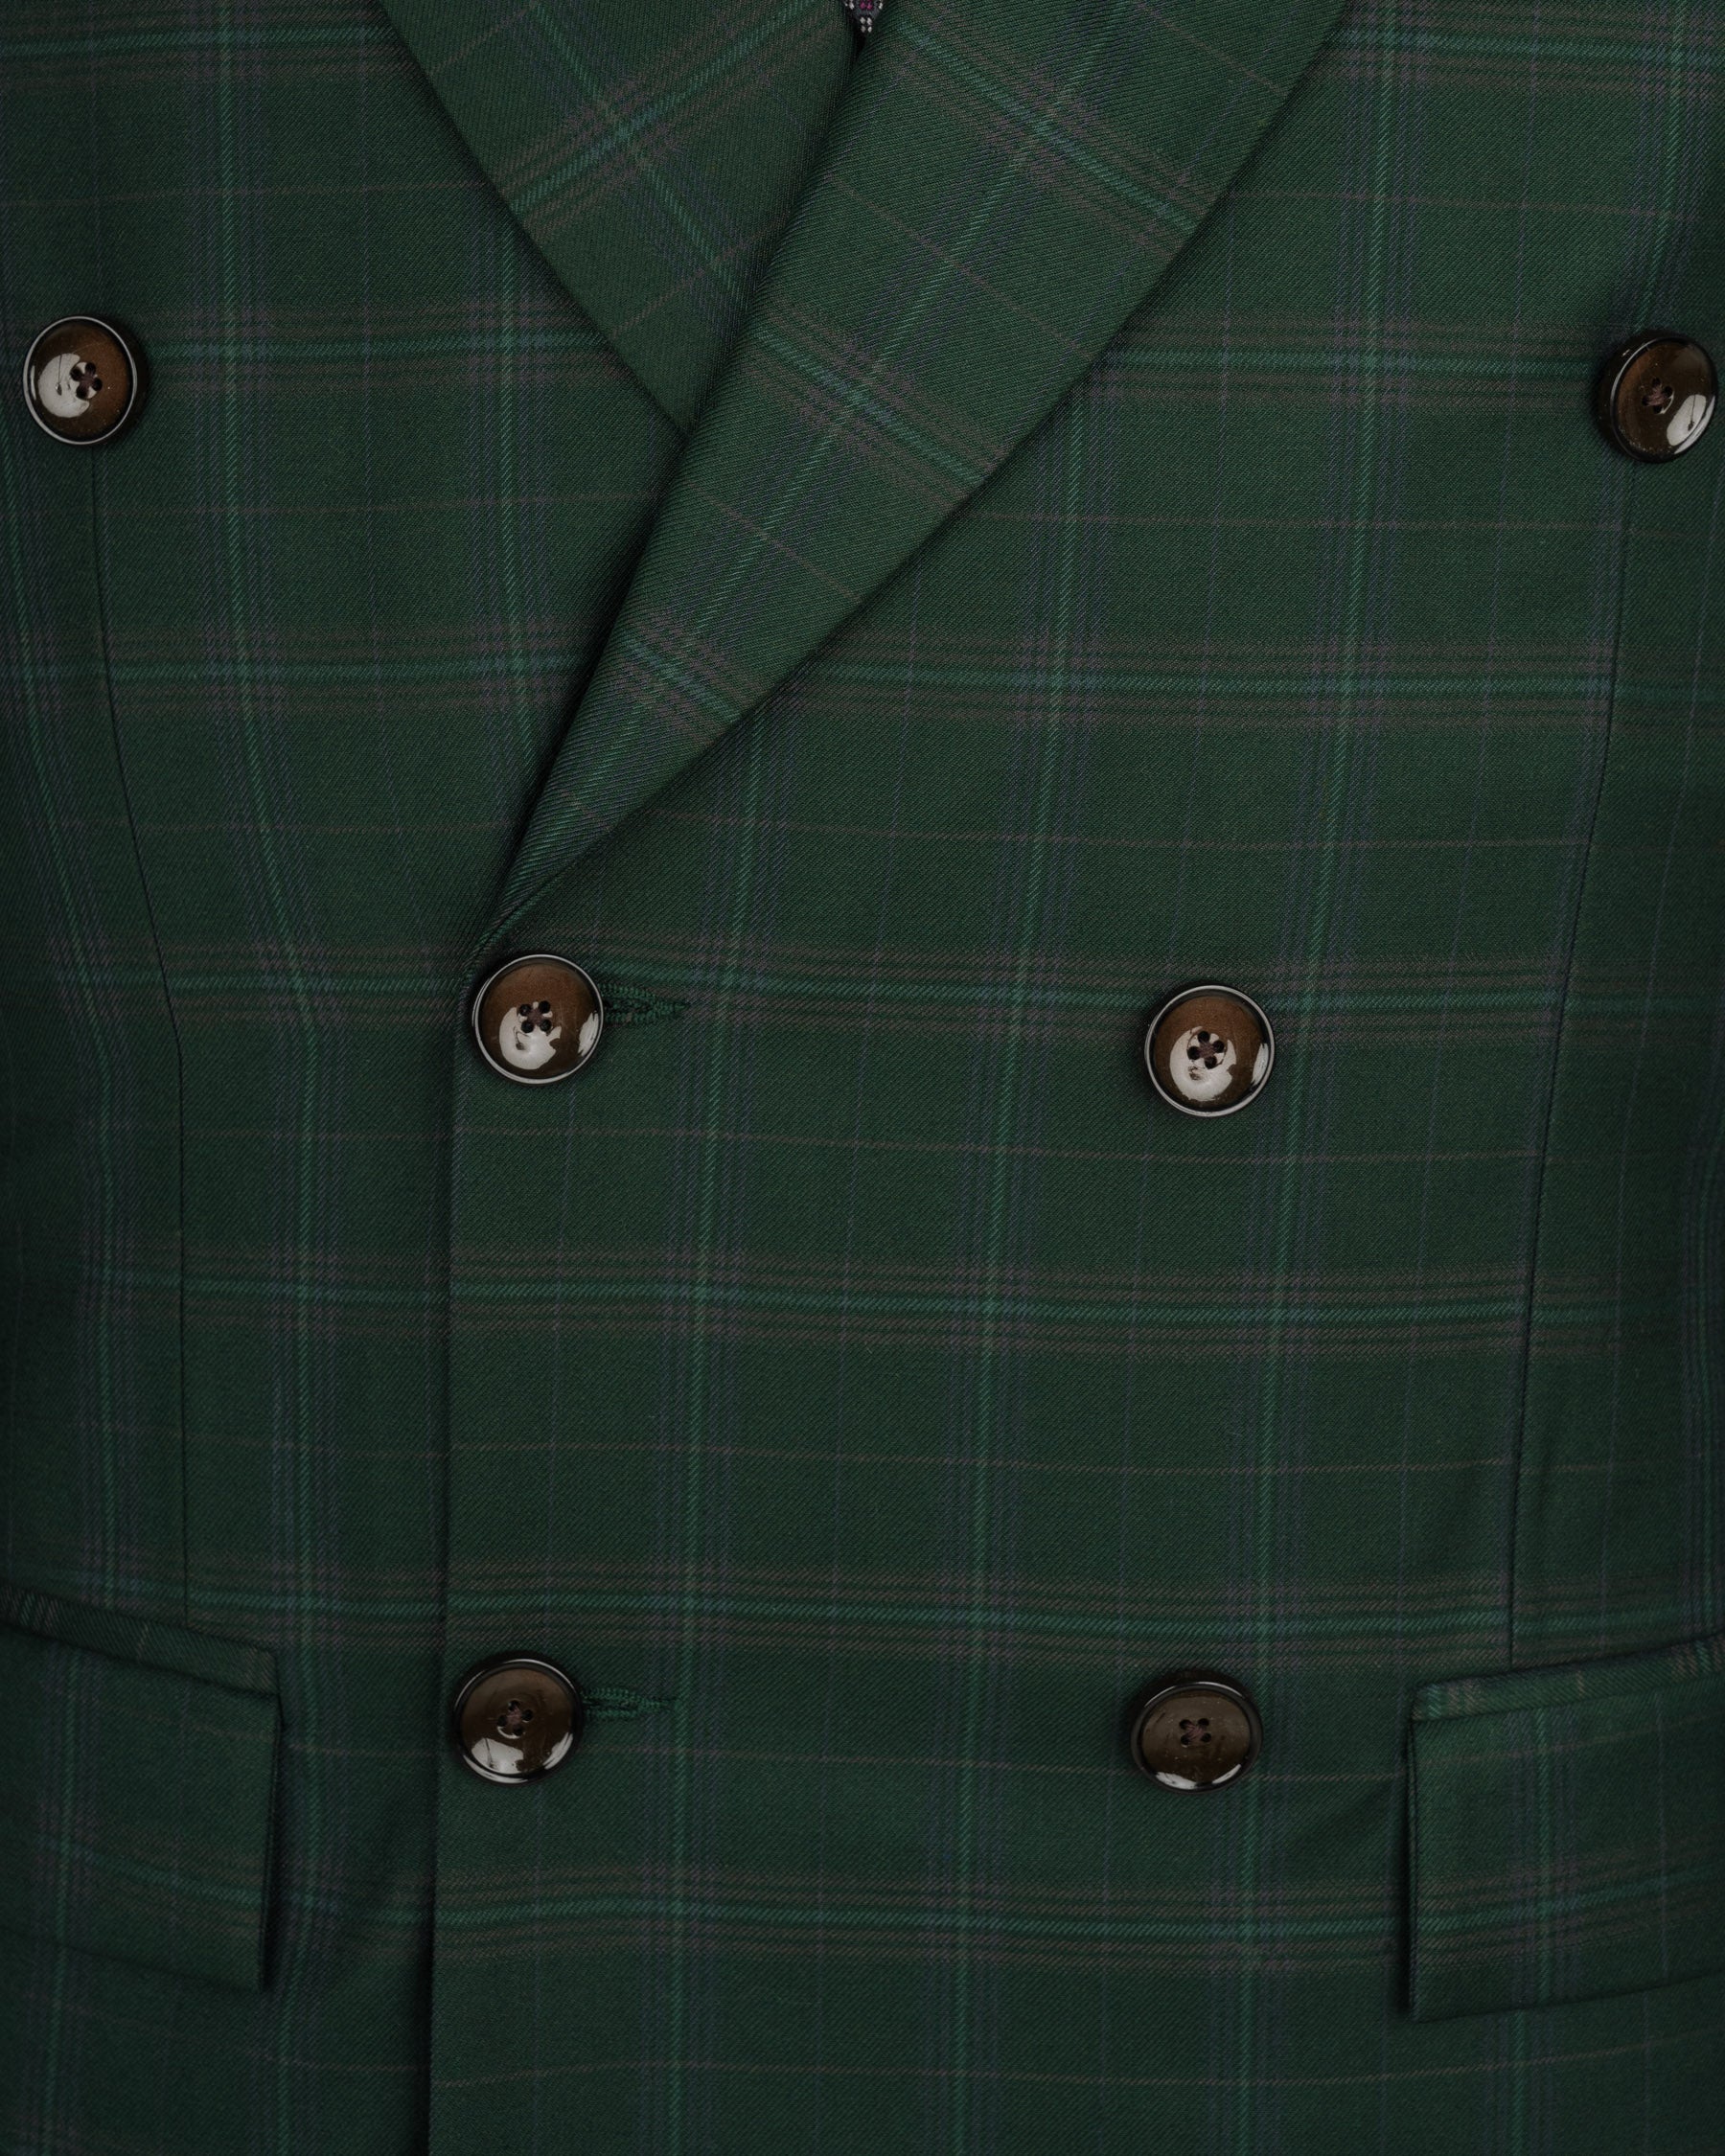 Celtic Green Super fine Plaid Double Breasted Woolrich Blazer BL1629-DB-36, BL1629-DB-38, BL1629-DB-40, BL1629-DB-42, BL1629-DB-44, BL1629-DB-46, BL1629-DB-48, BL1629-DB-50, BL1629-DB-52, BL1629-DB-54, BL1629-DB-56, BL1629-DB-58, BL1629-DB-60